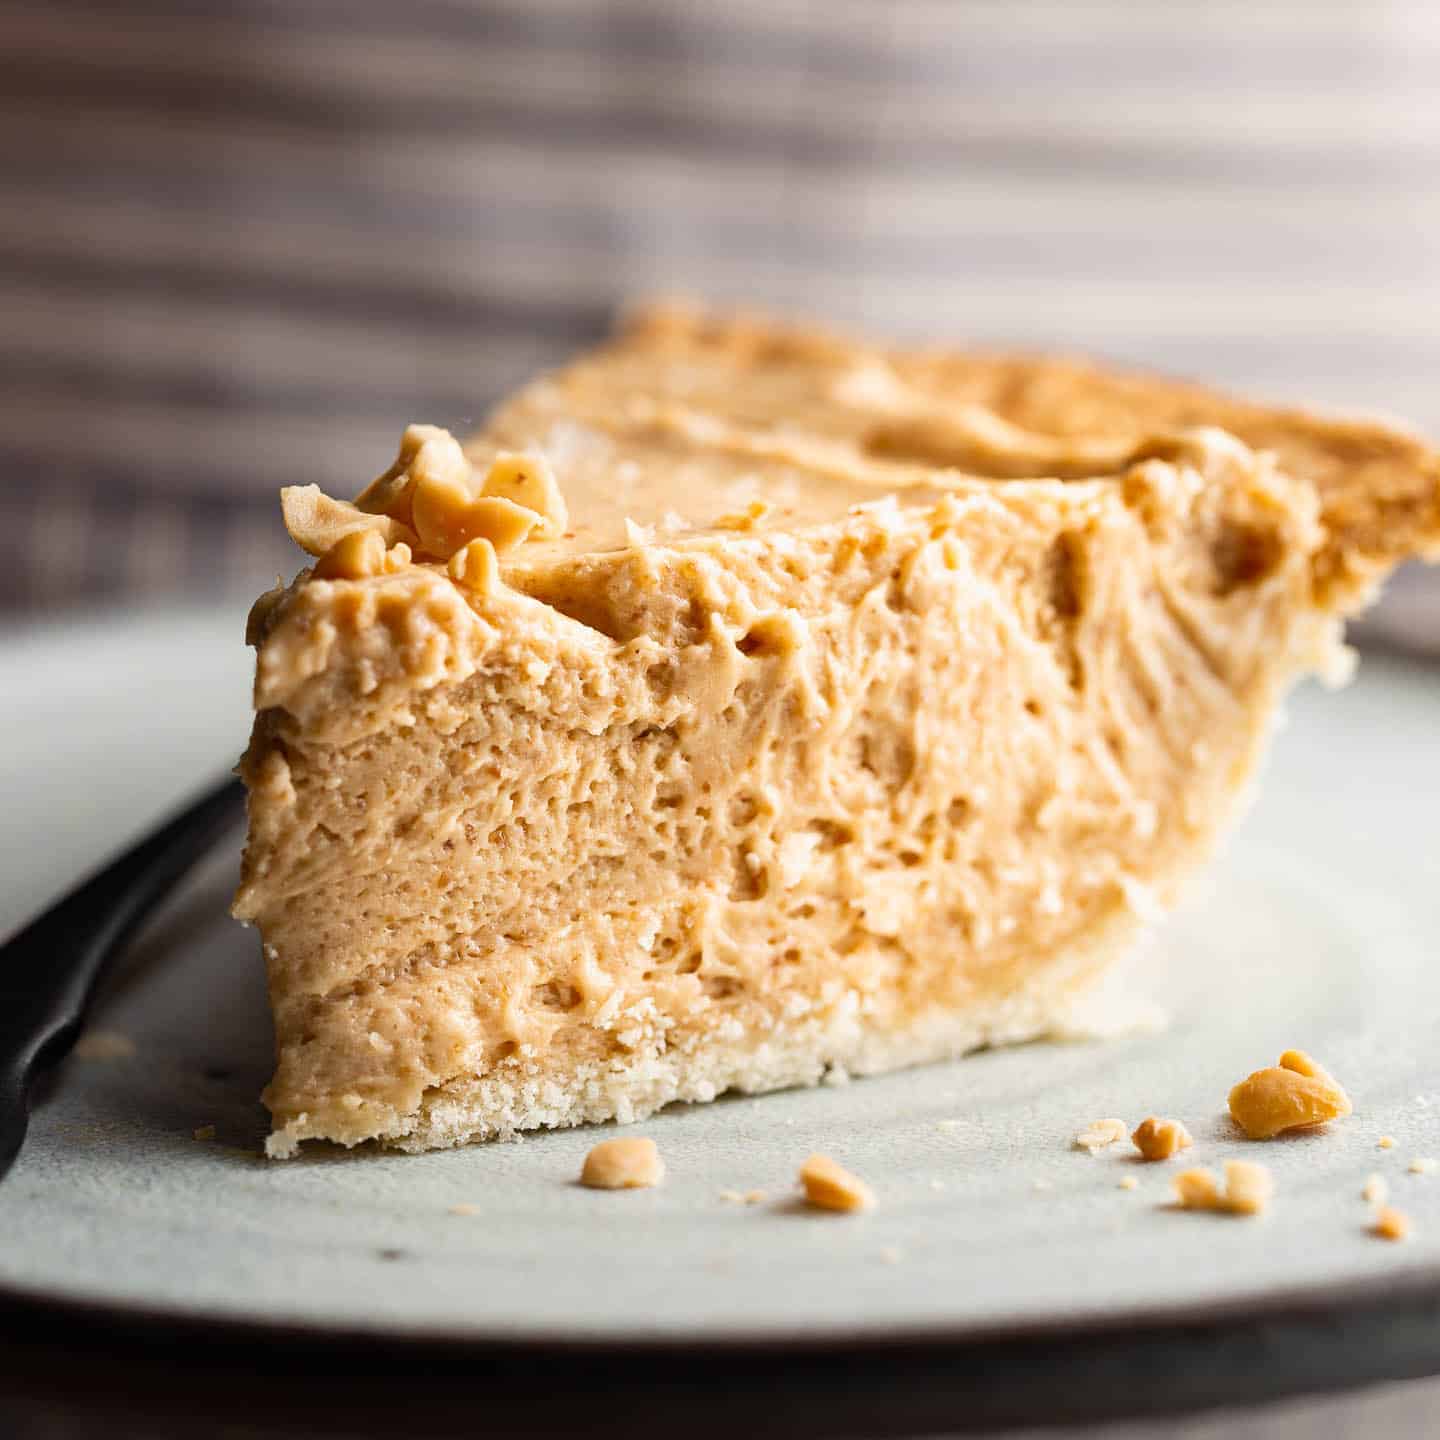 A big slice of peanut butter pie on a plate.